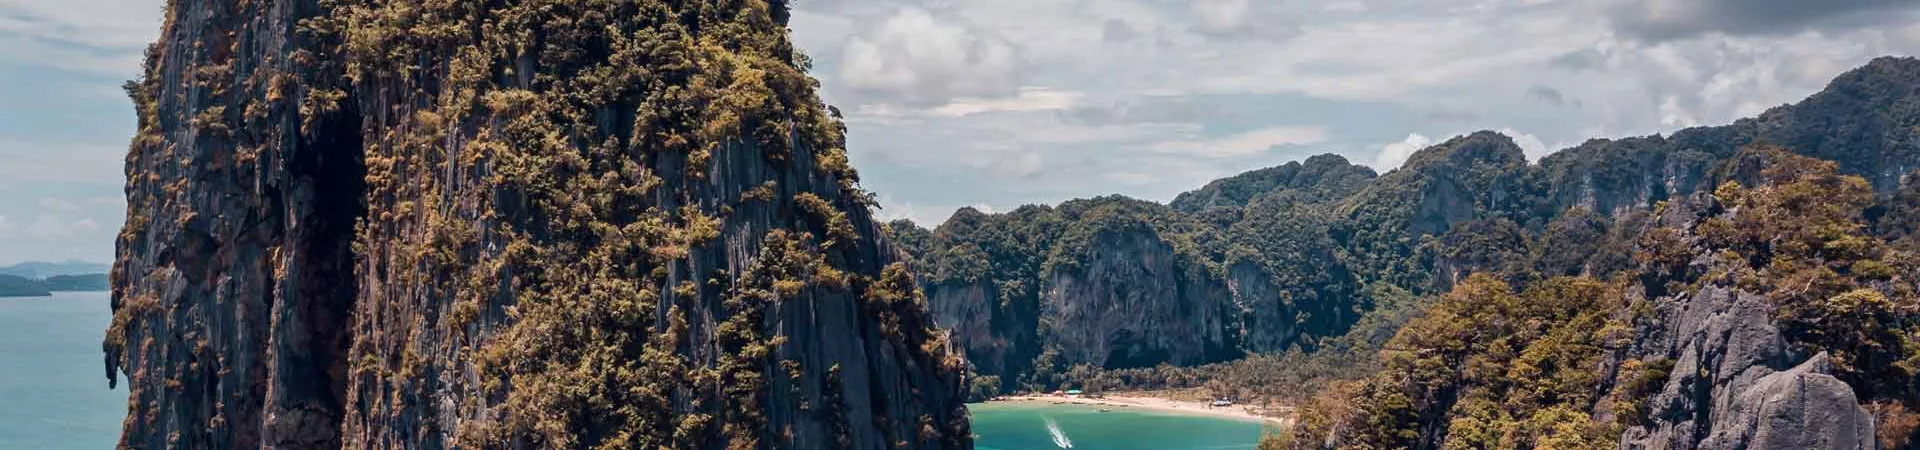 Phuket Trips and Travel Guide